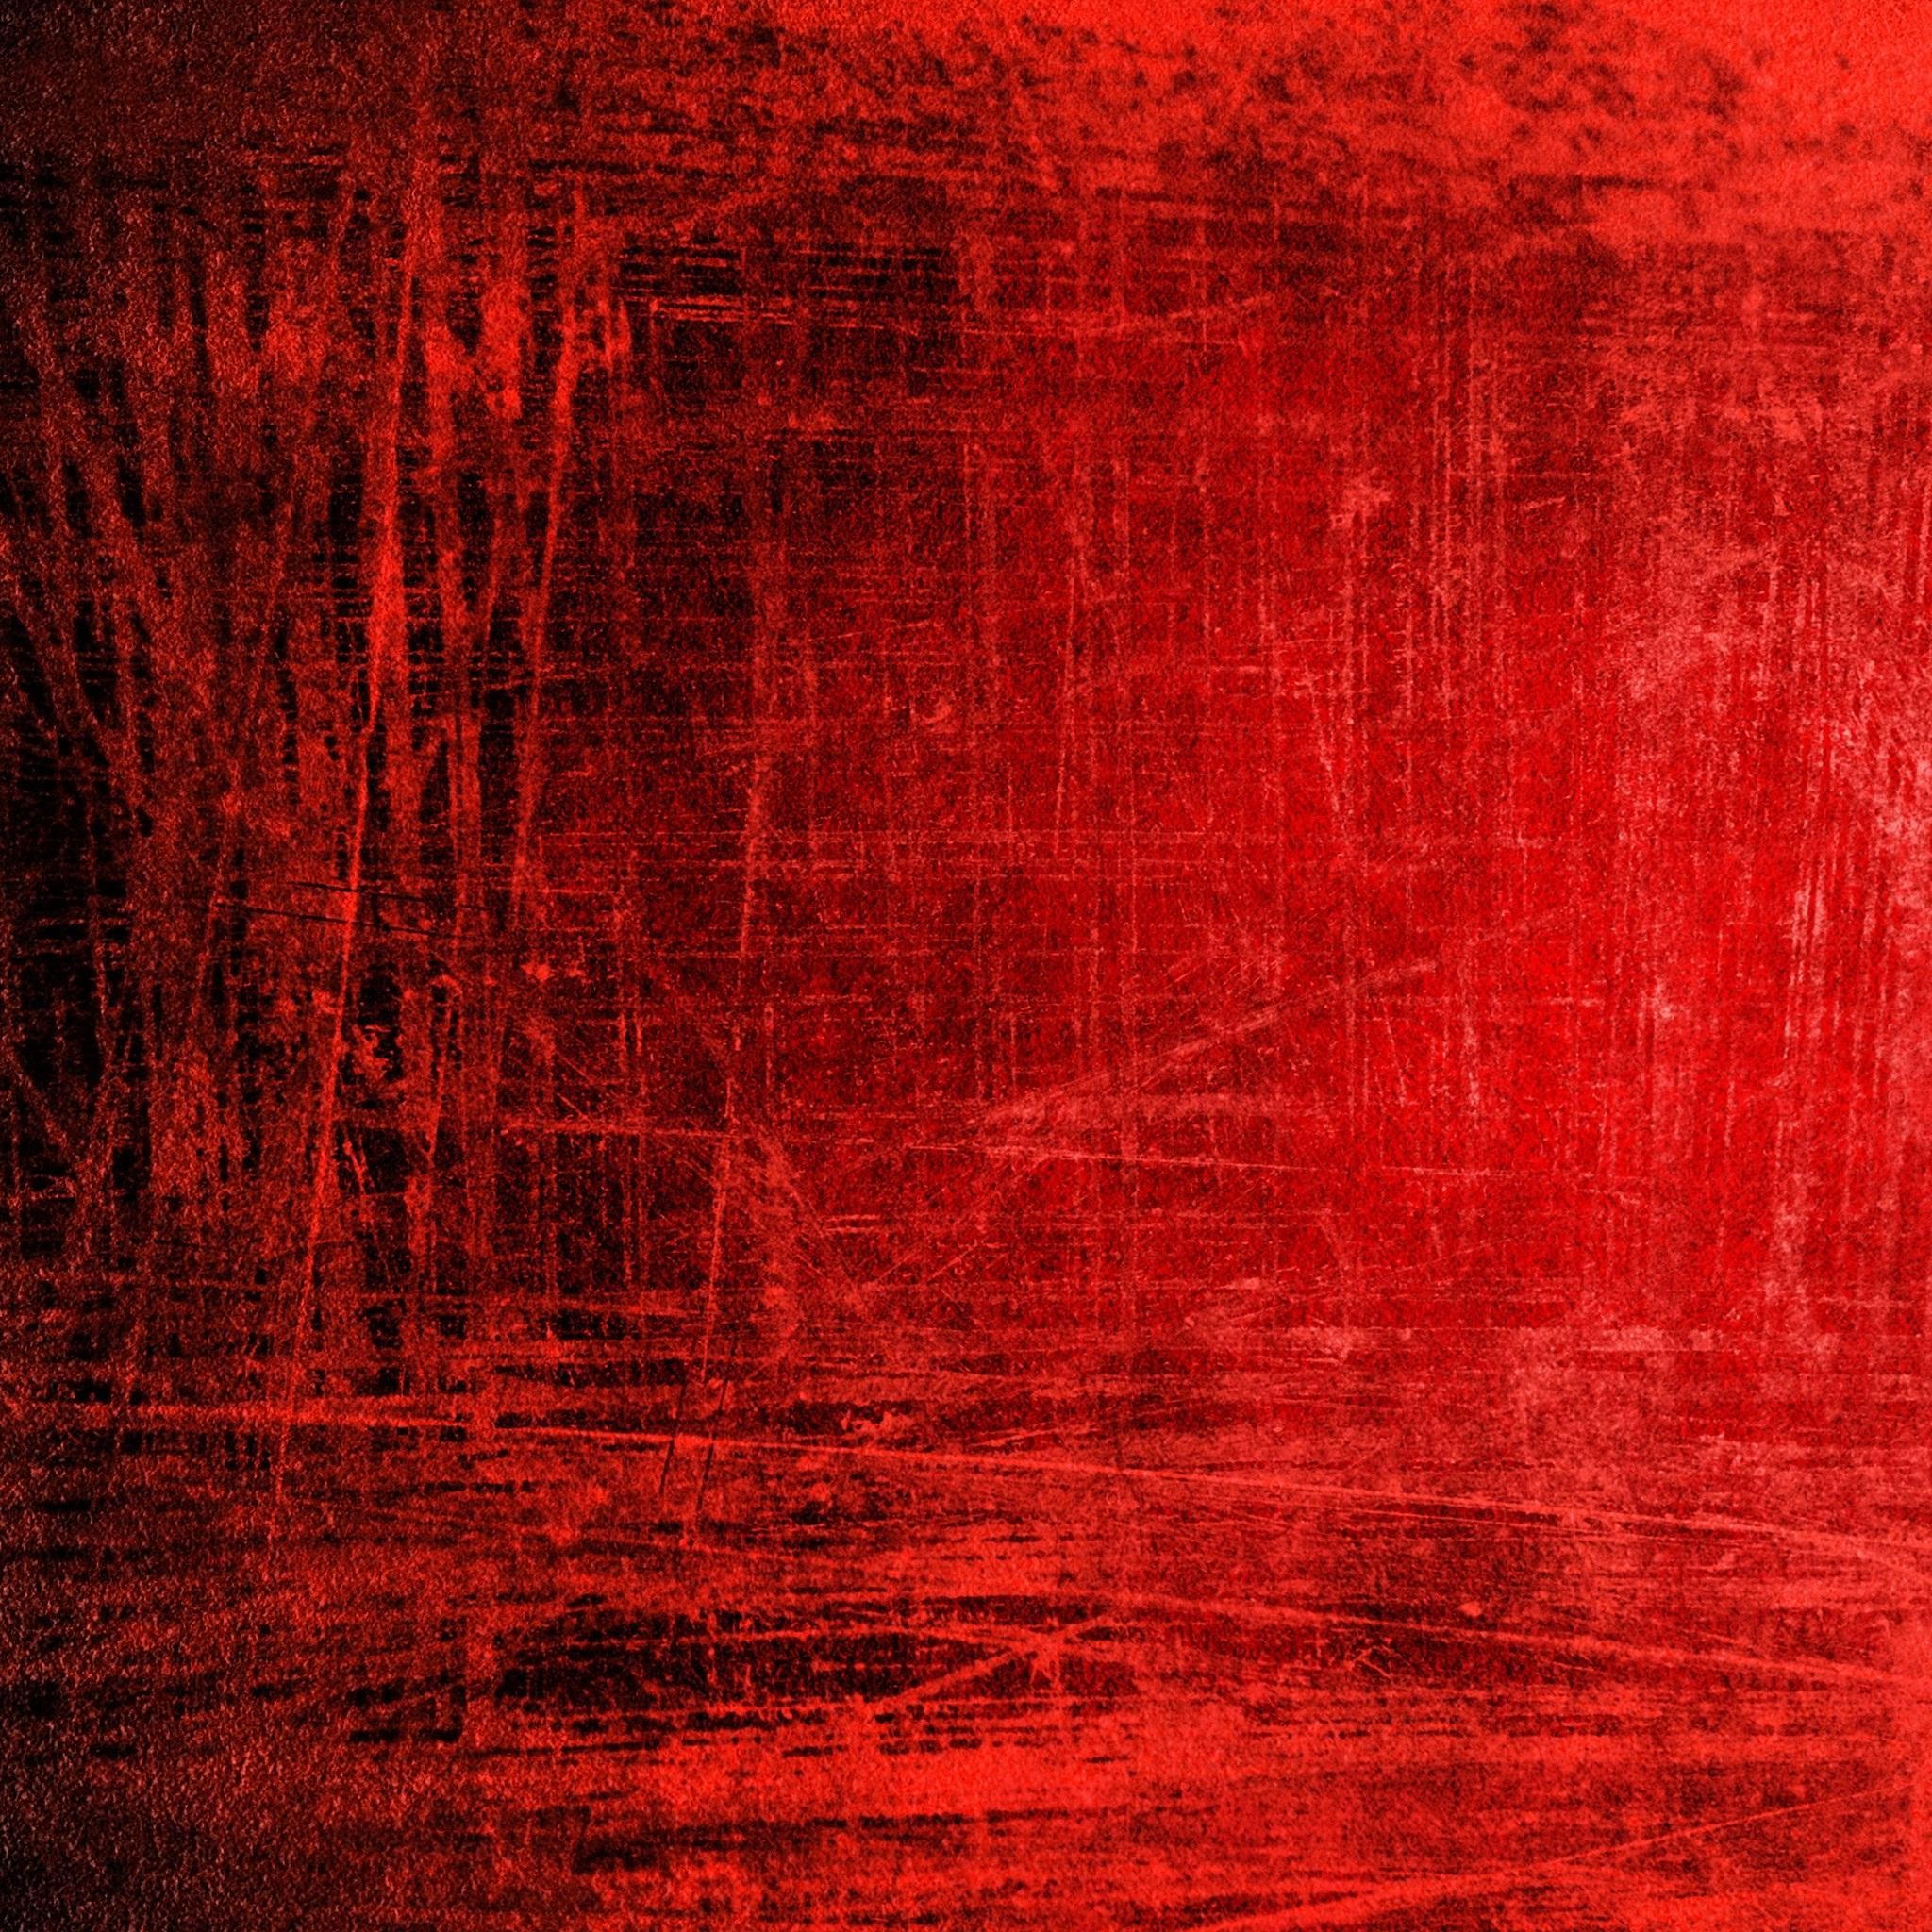 Red Background with Scratches